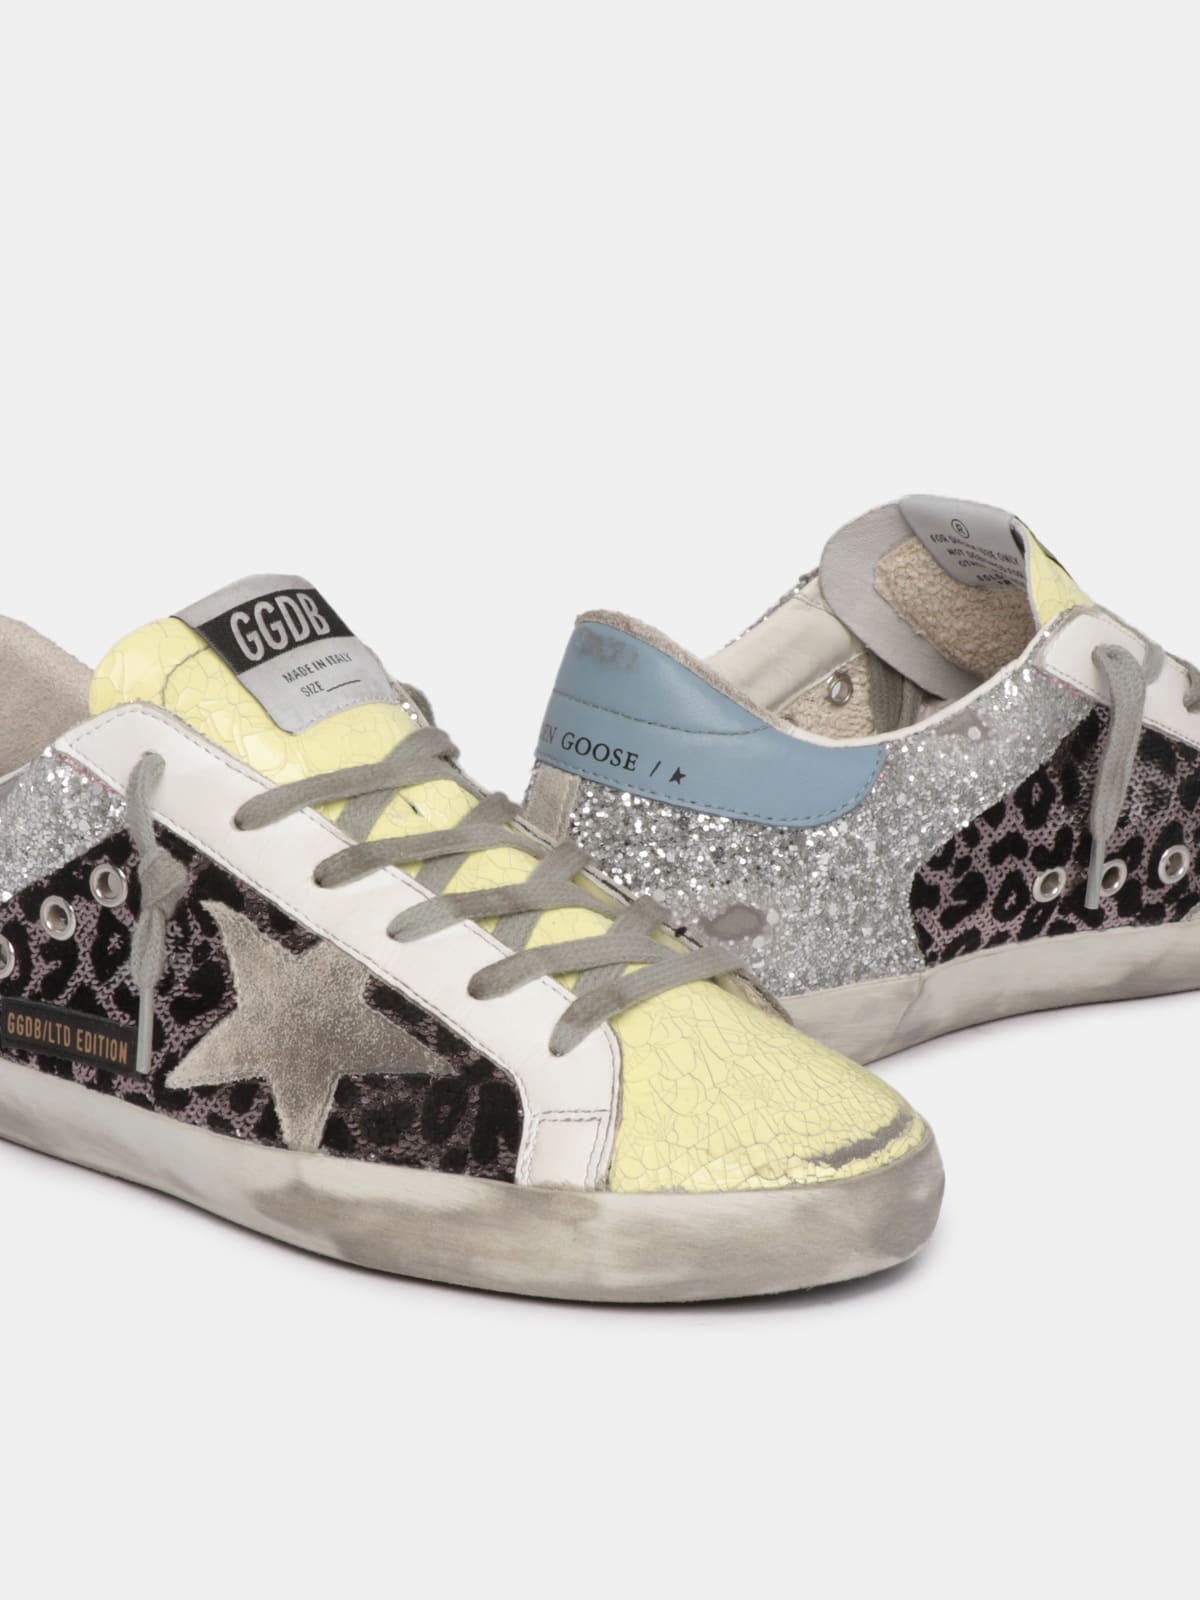 LTD Super-Star sneakers with silver glitter and sequins | Golden Goose